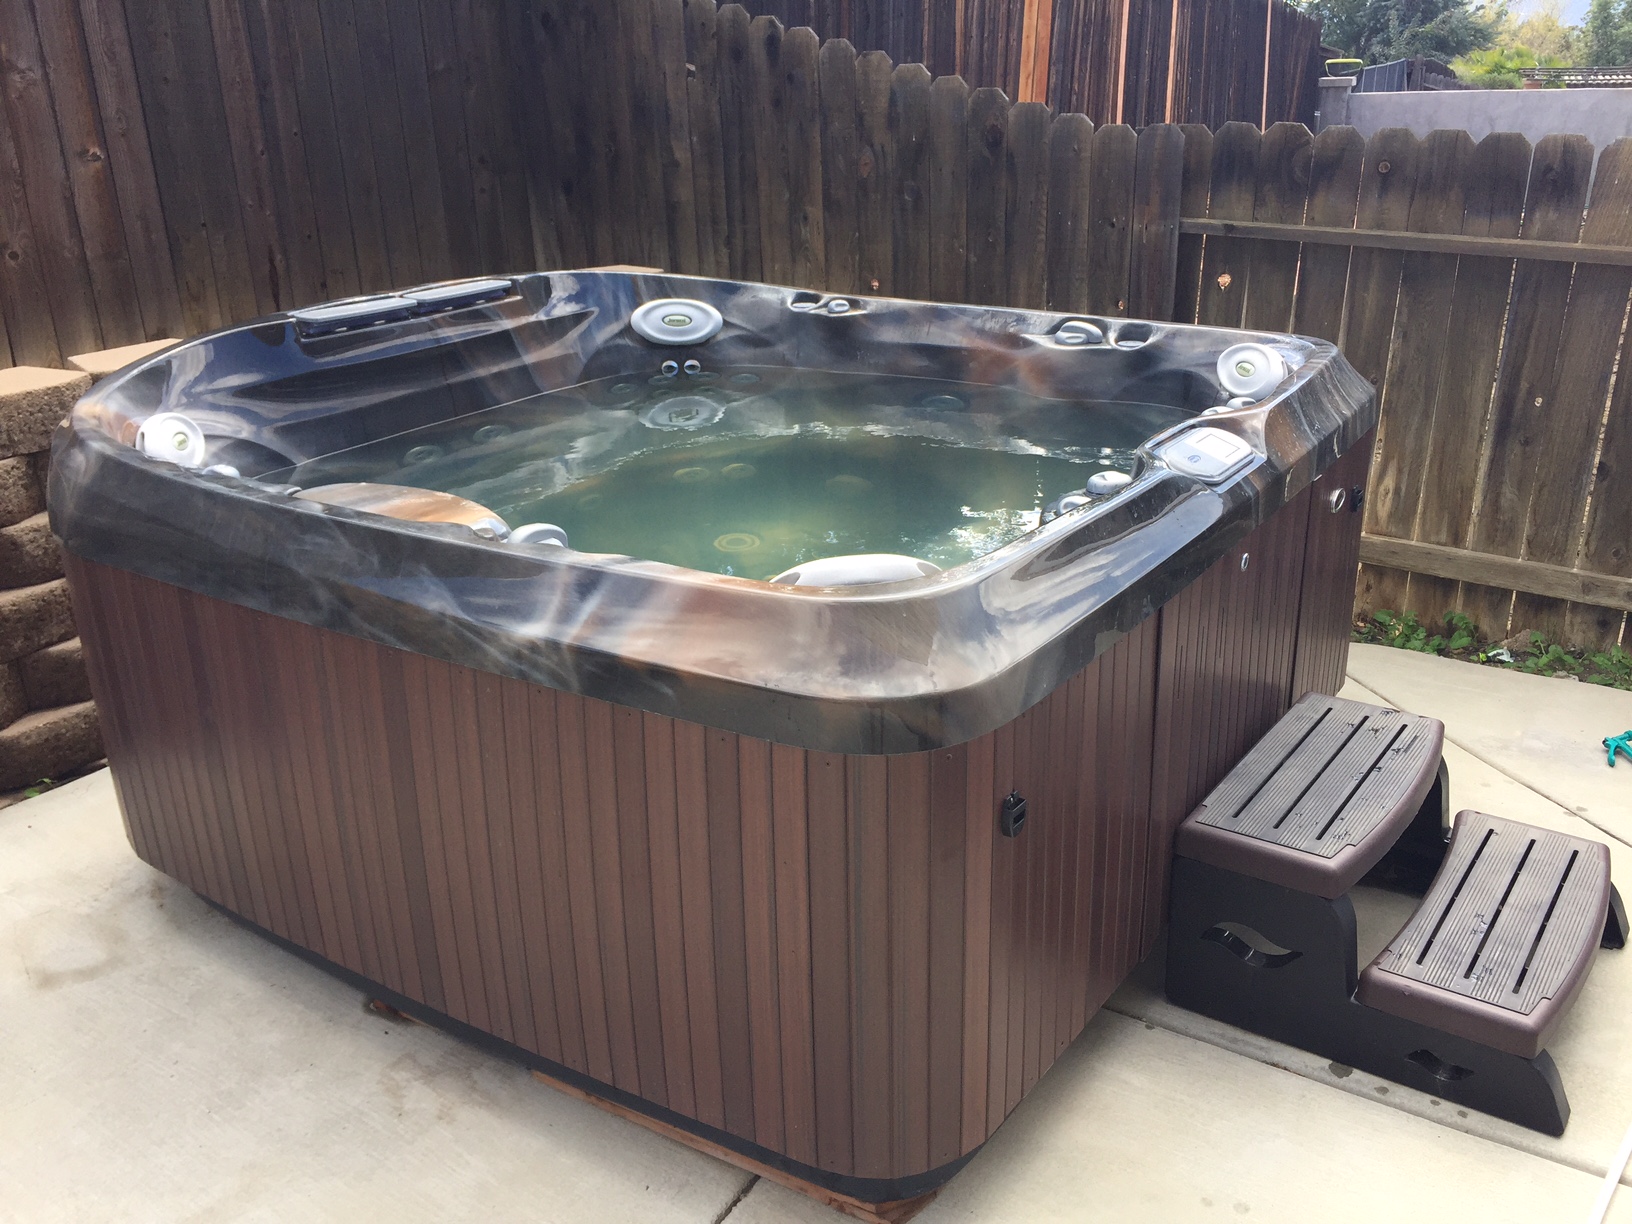 Fairly New 2017 Jacuzzi Brand 6-7 person Hot Tub Spa Massage J470 hot tubs for sale kansas city